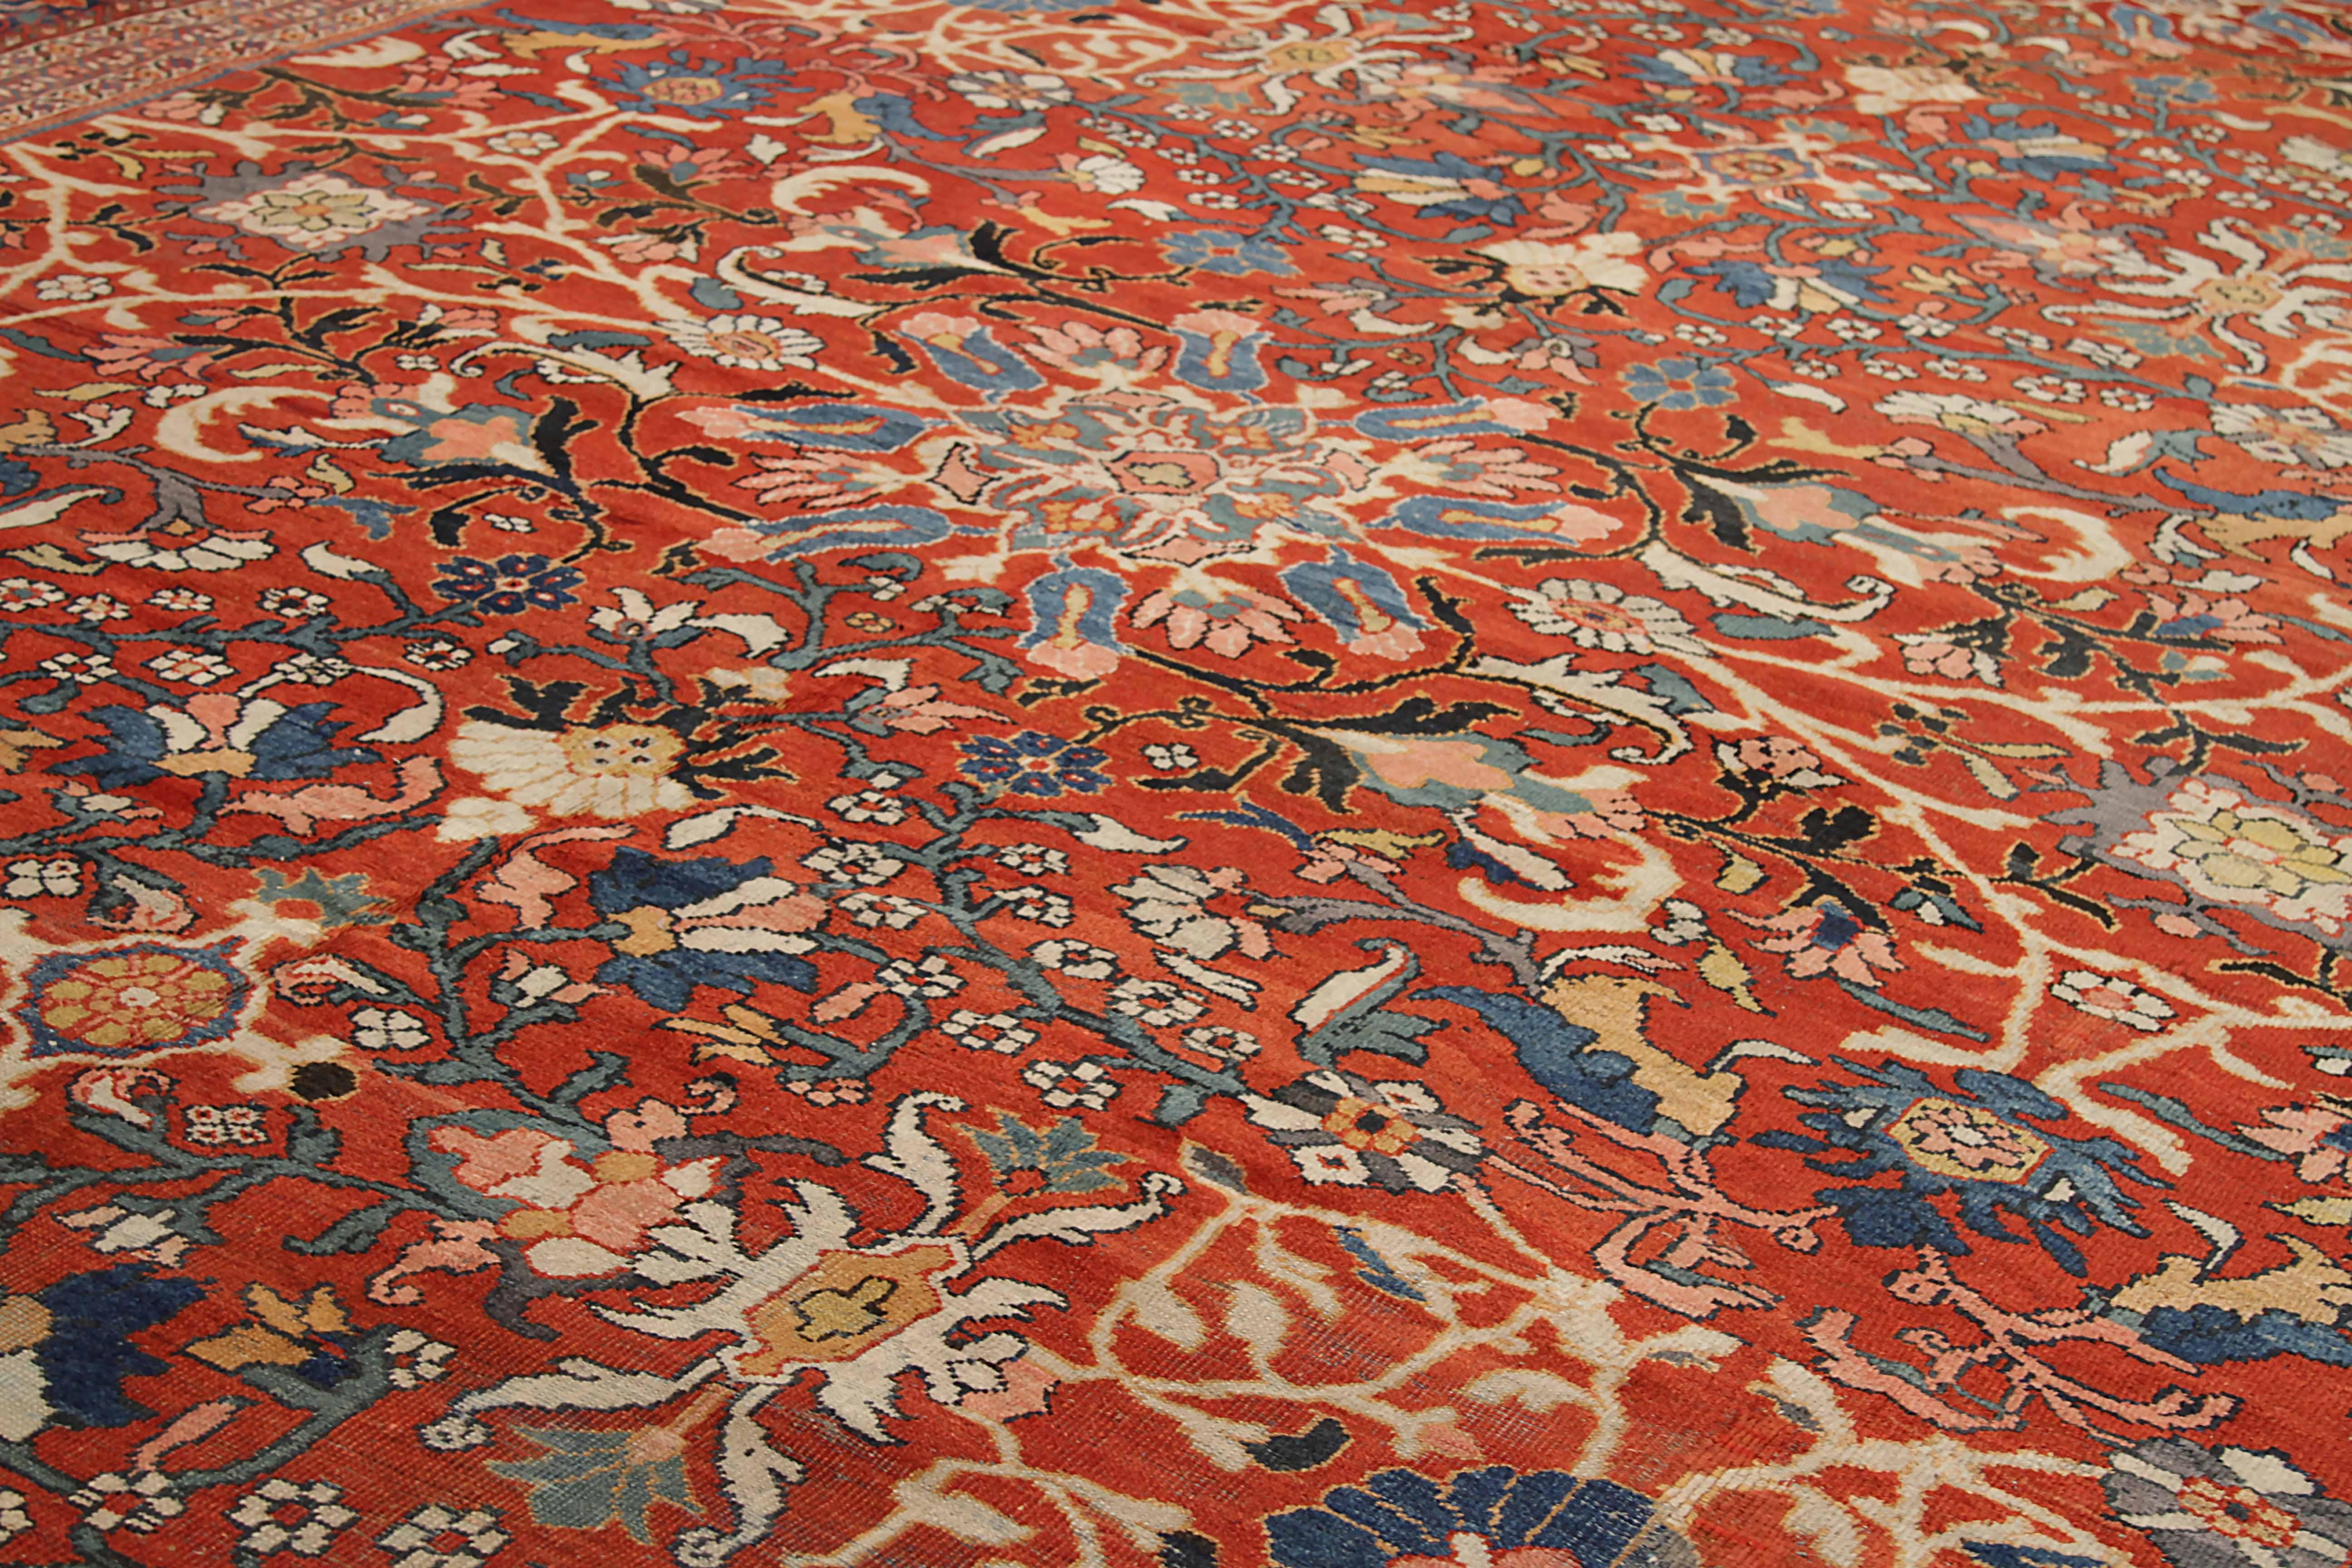 Large Antique Persian Sultanabad Area Rug Circa 1900s In Excellent Condition For Sale In Dallas, TX